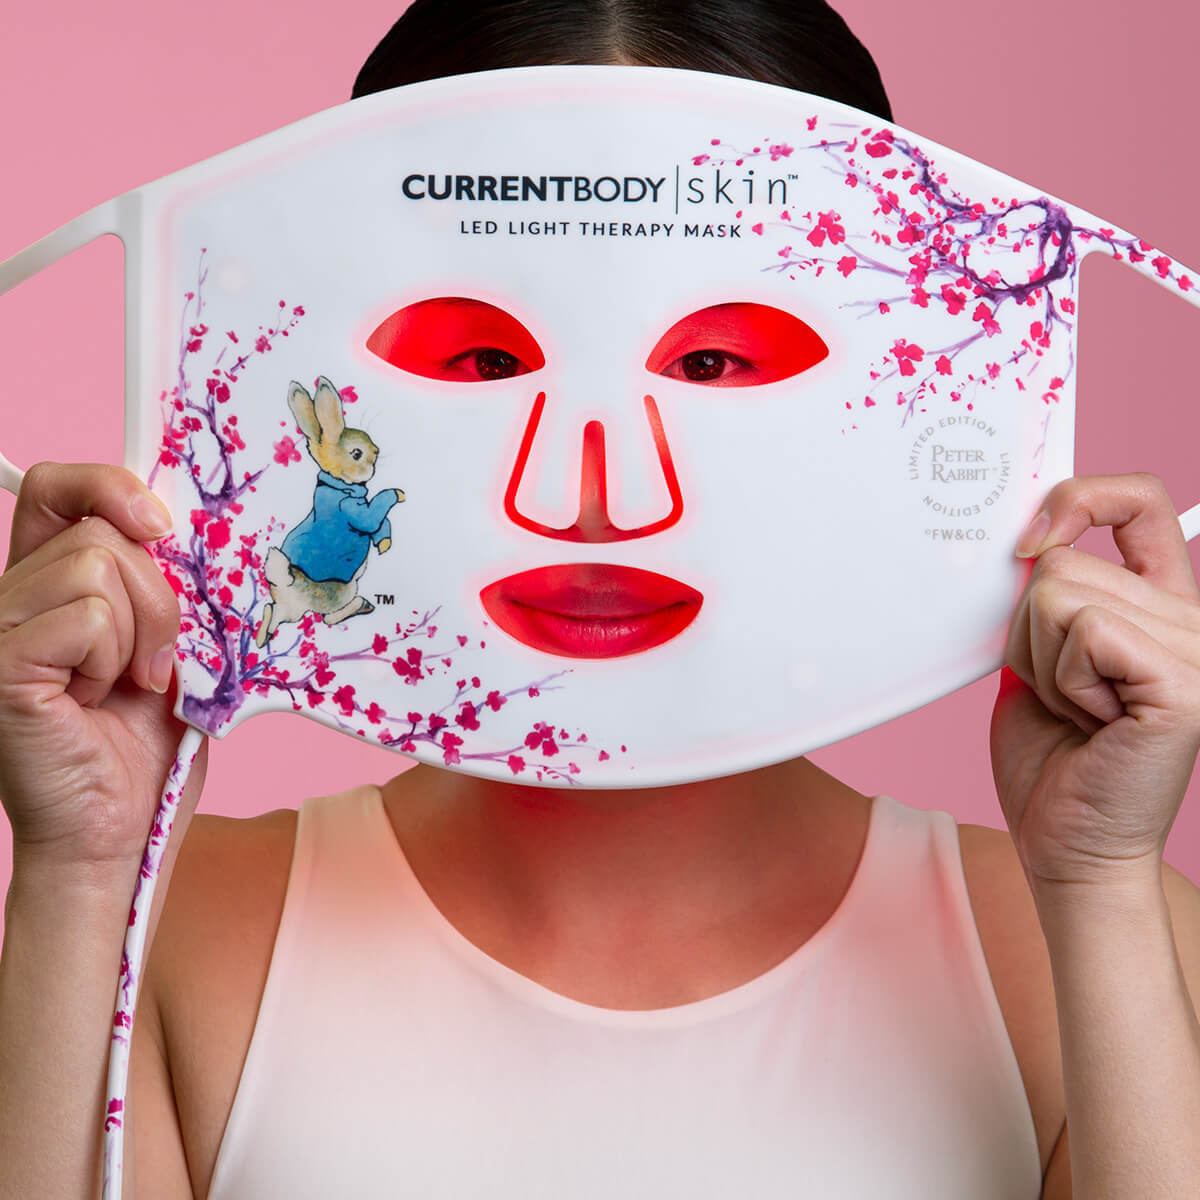 CURRNTBODY skin LED LIGHT THERAPY MASKLEDマスク